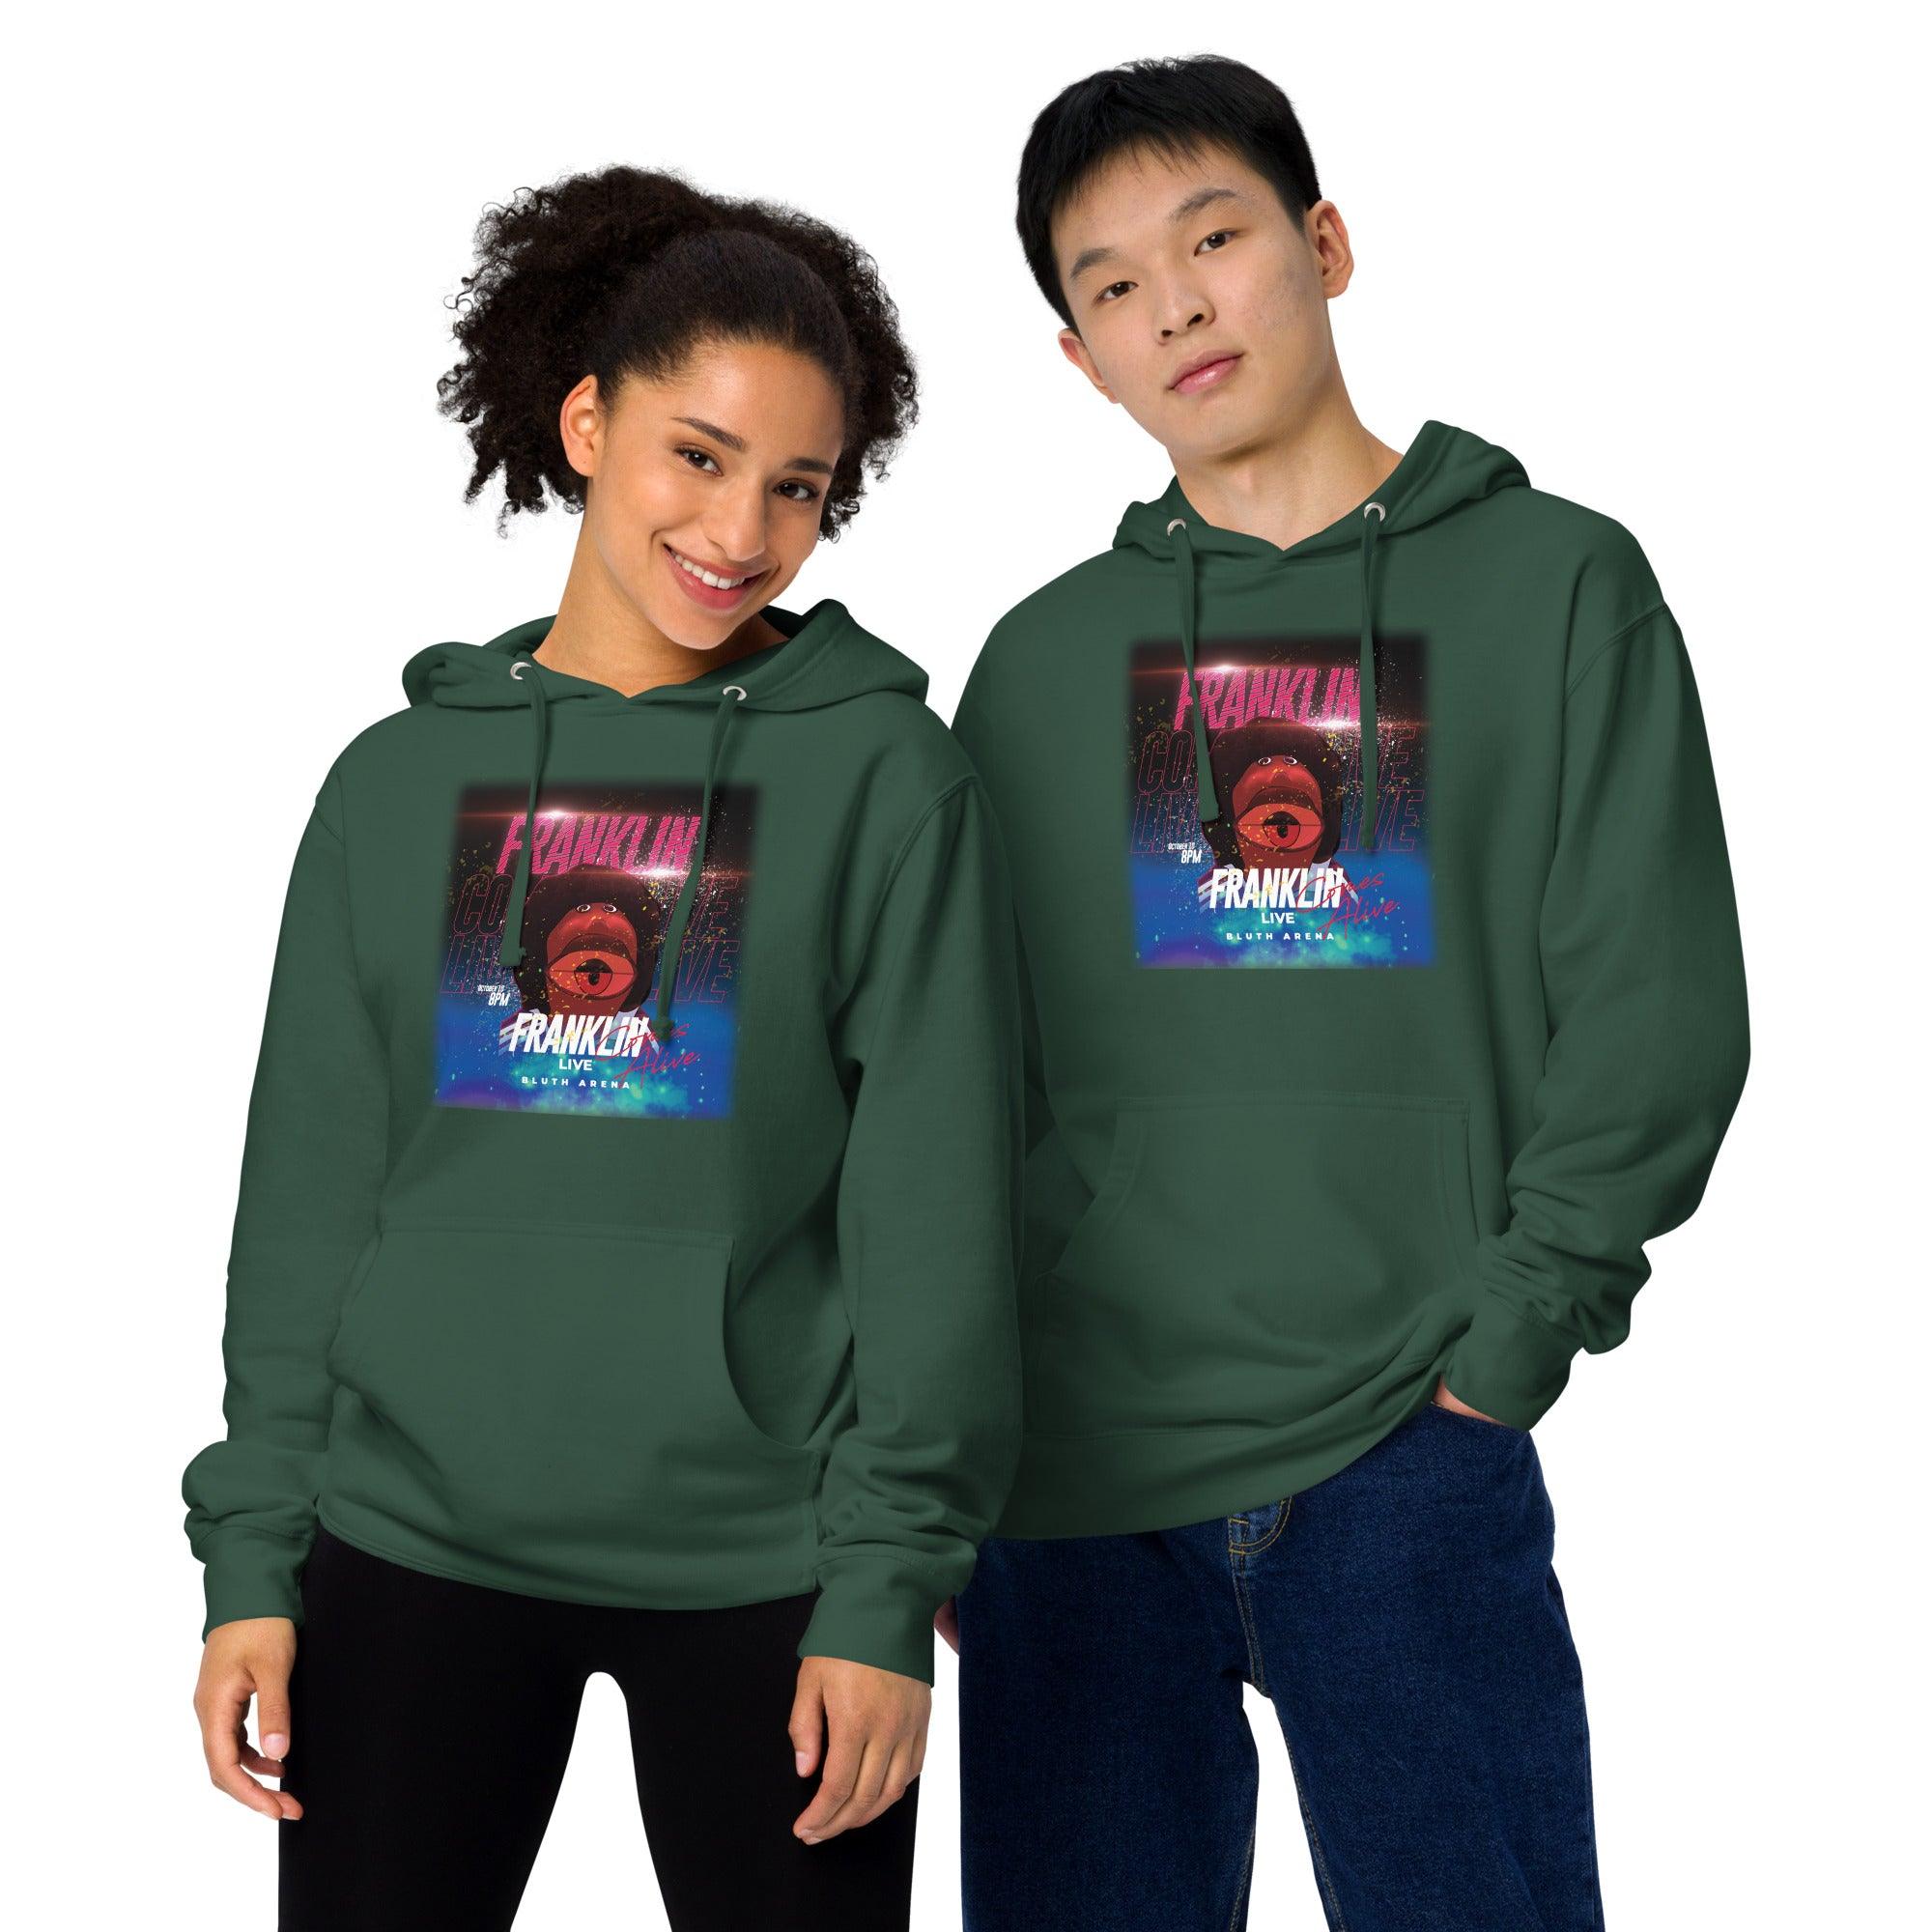 Franklin Comes Alive Live Unisex midweight hoodie